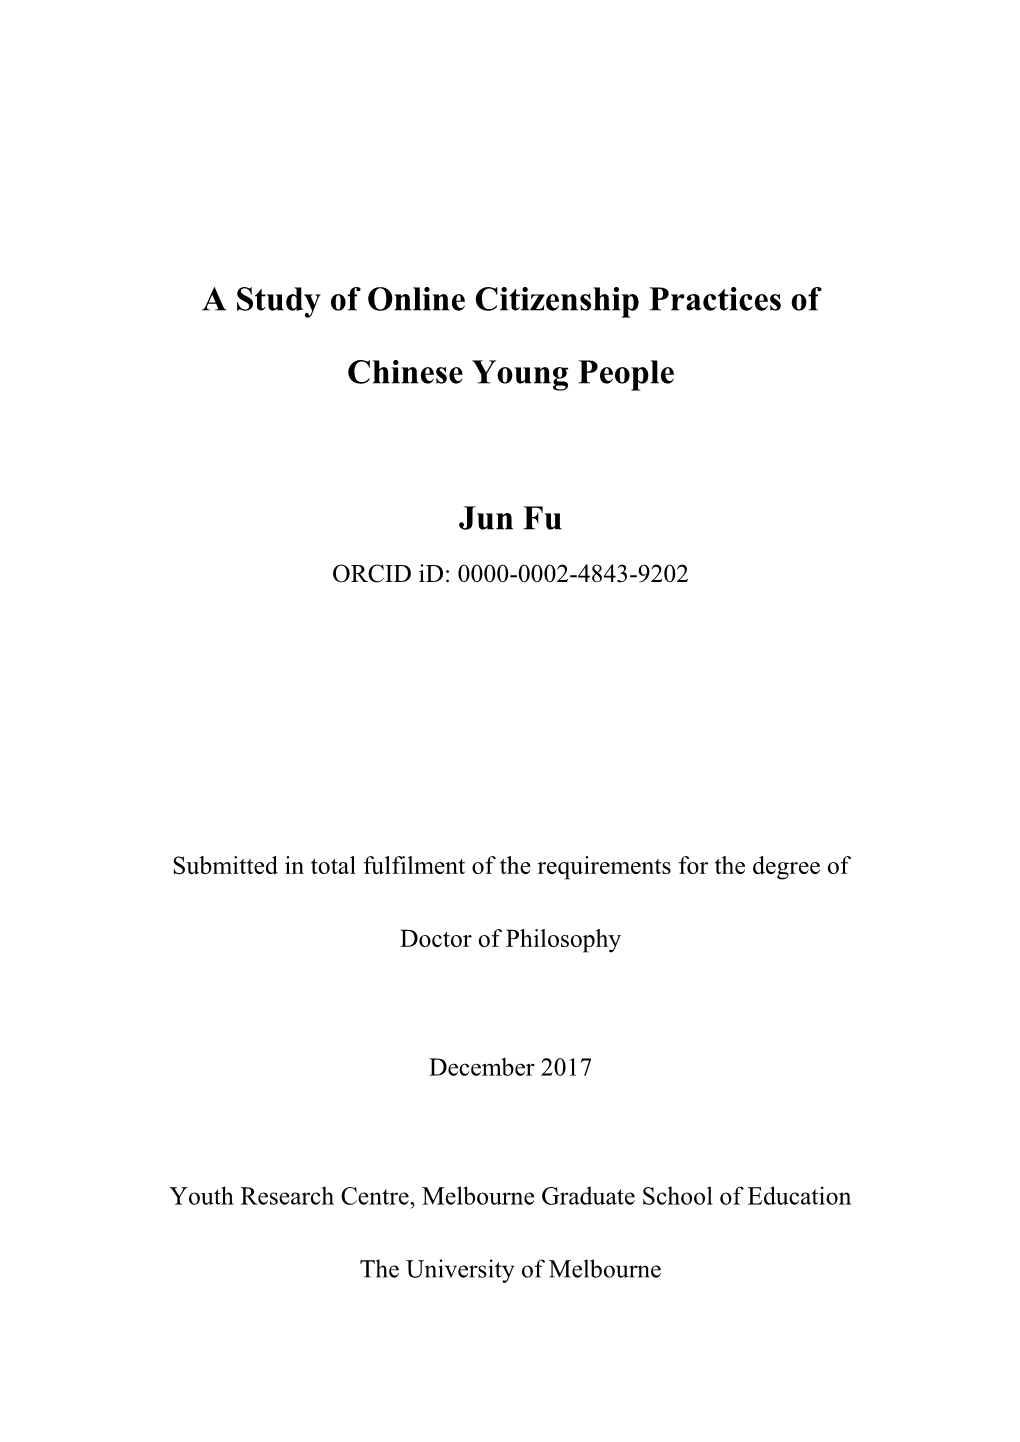 A Study of Online Citizenship Practices of Chinese Young People